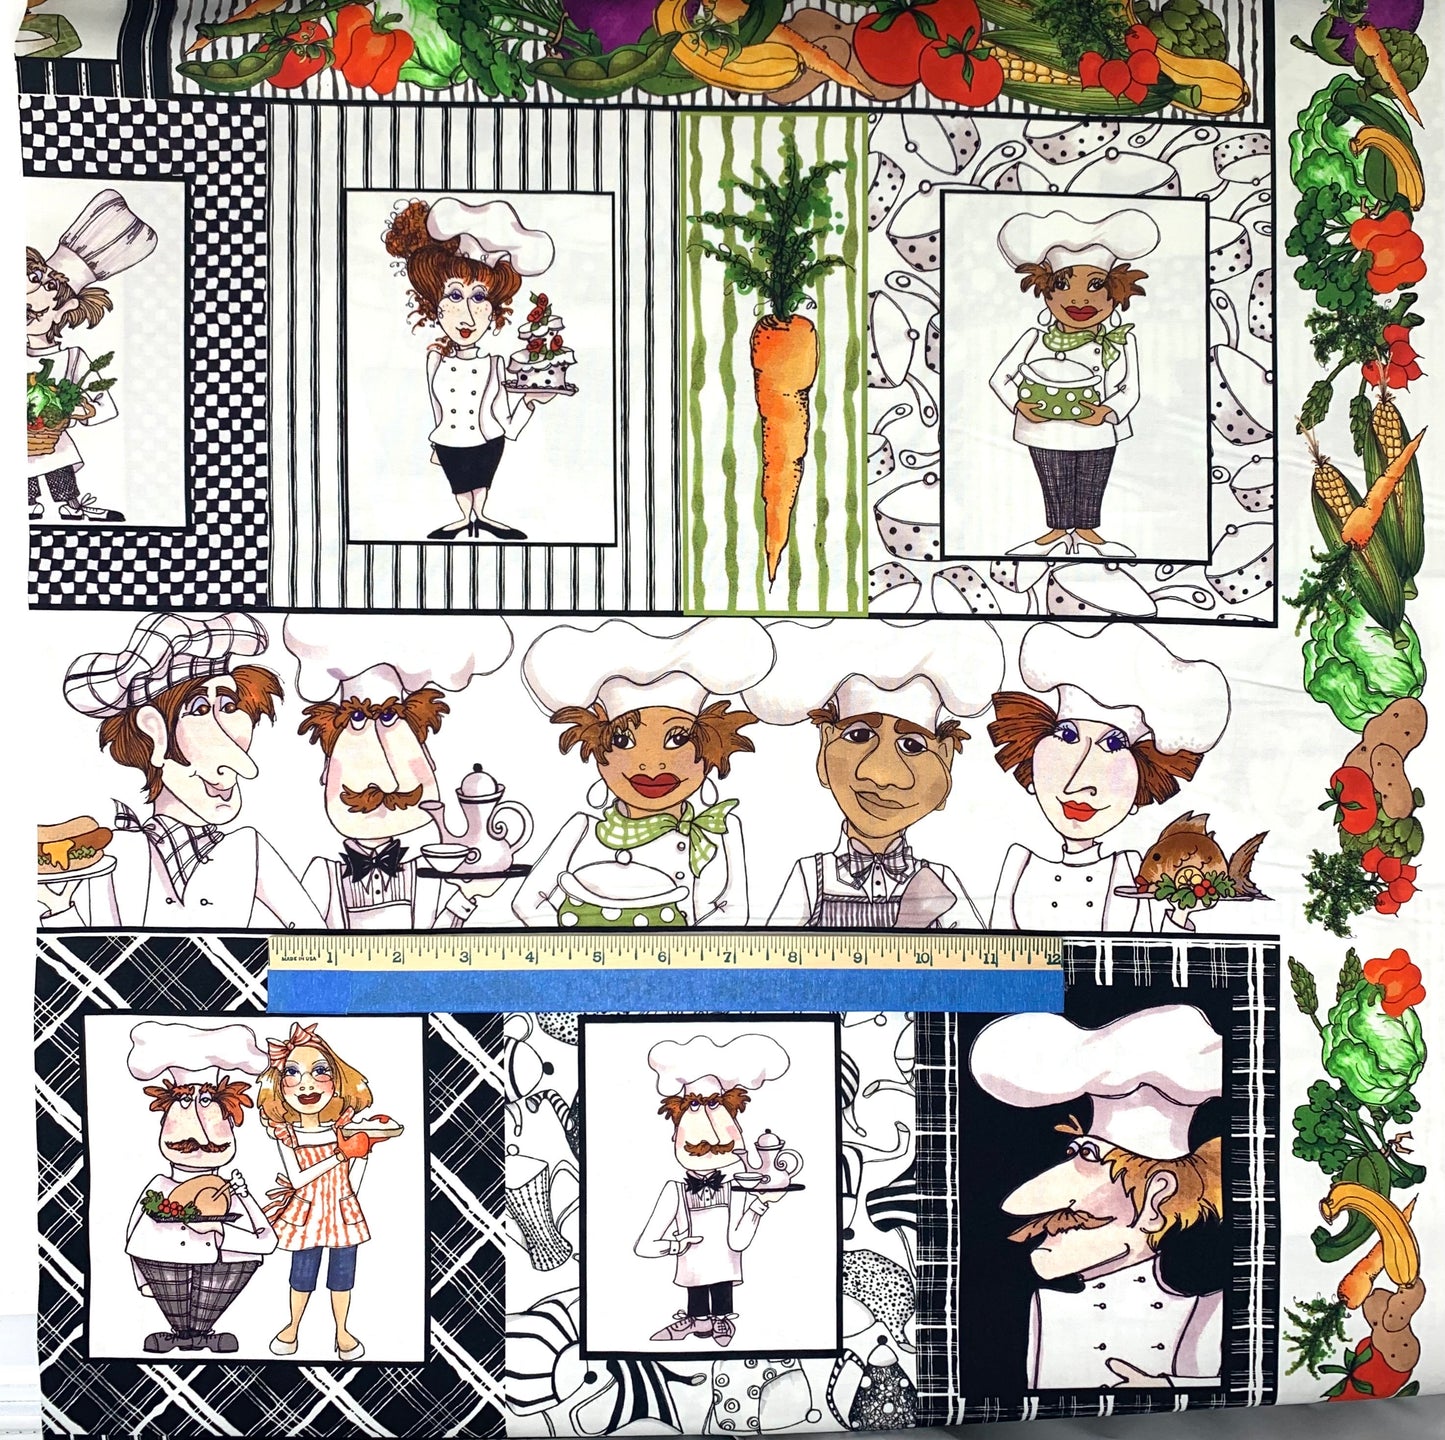 Happy Chefs Fabric Panel, Cooks, Cooking, Loralei Designs, 692620